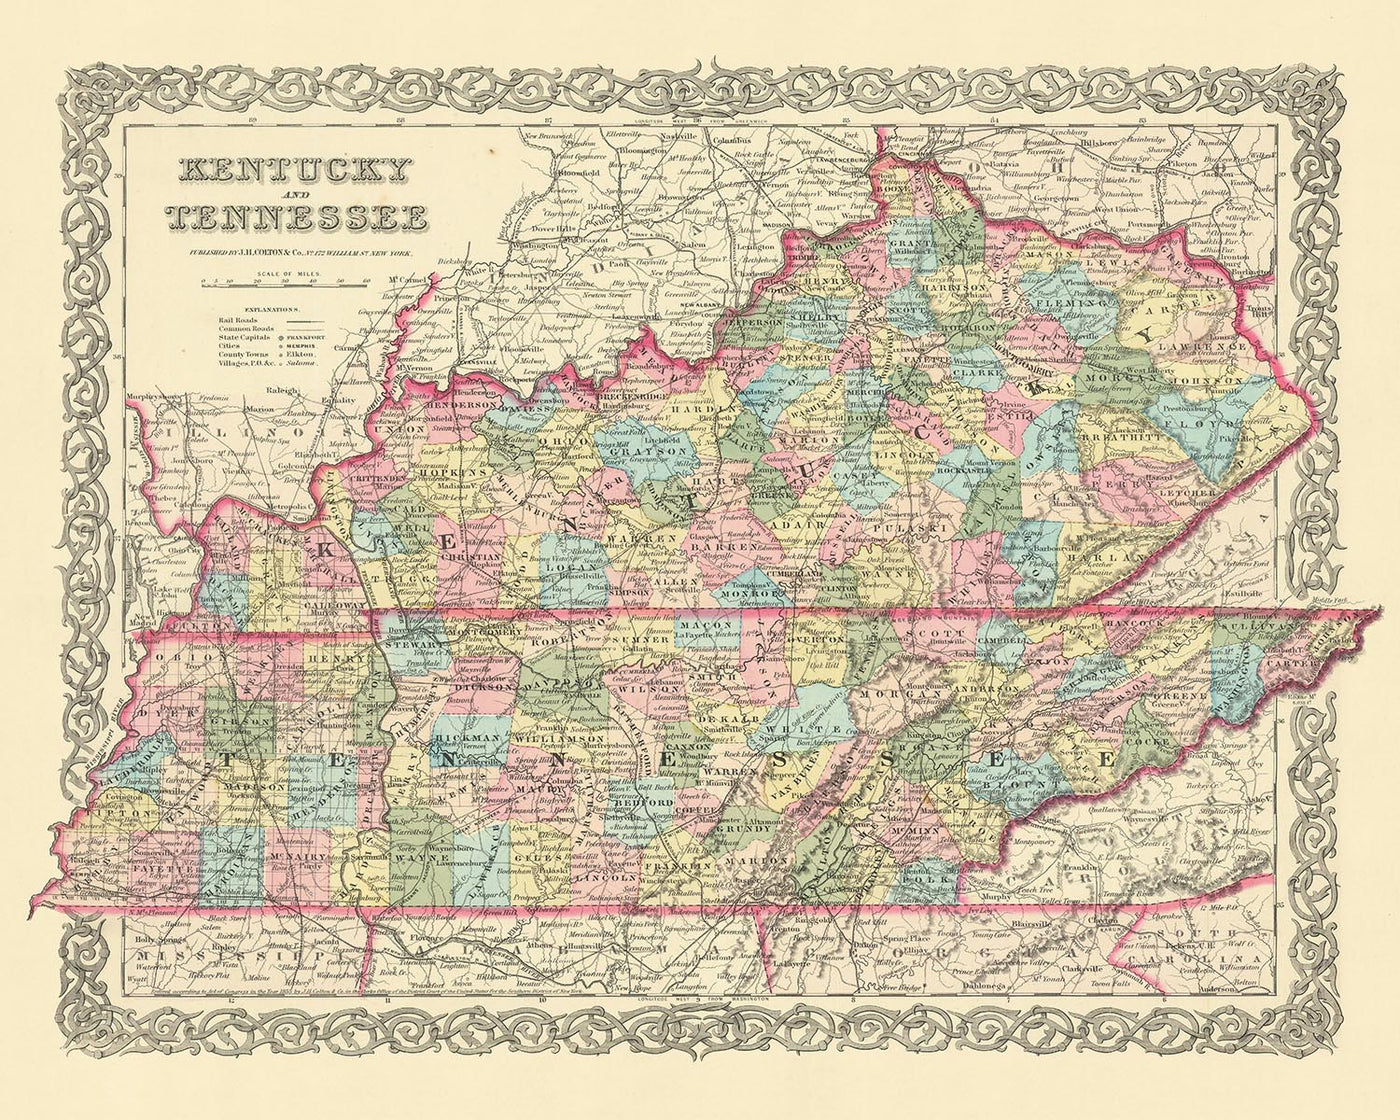 Old map of Kentucky & Tennessee by J. H. Colton, 1855: Louisville, Lexington, Frankfort, Covington, and Bowling Green